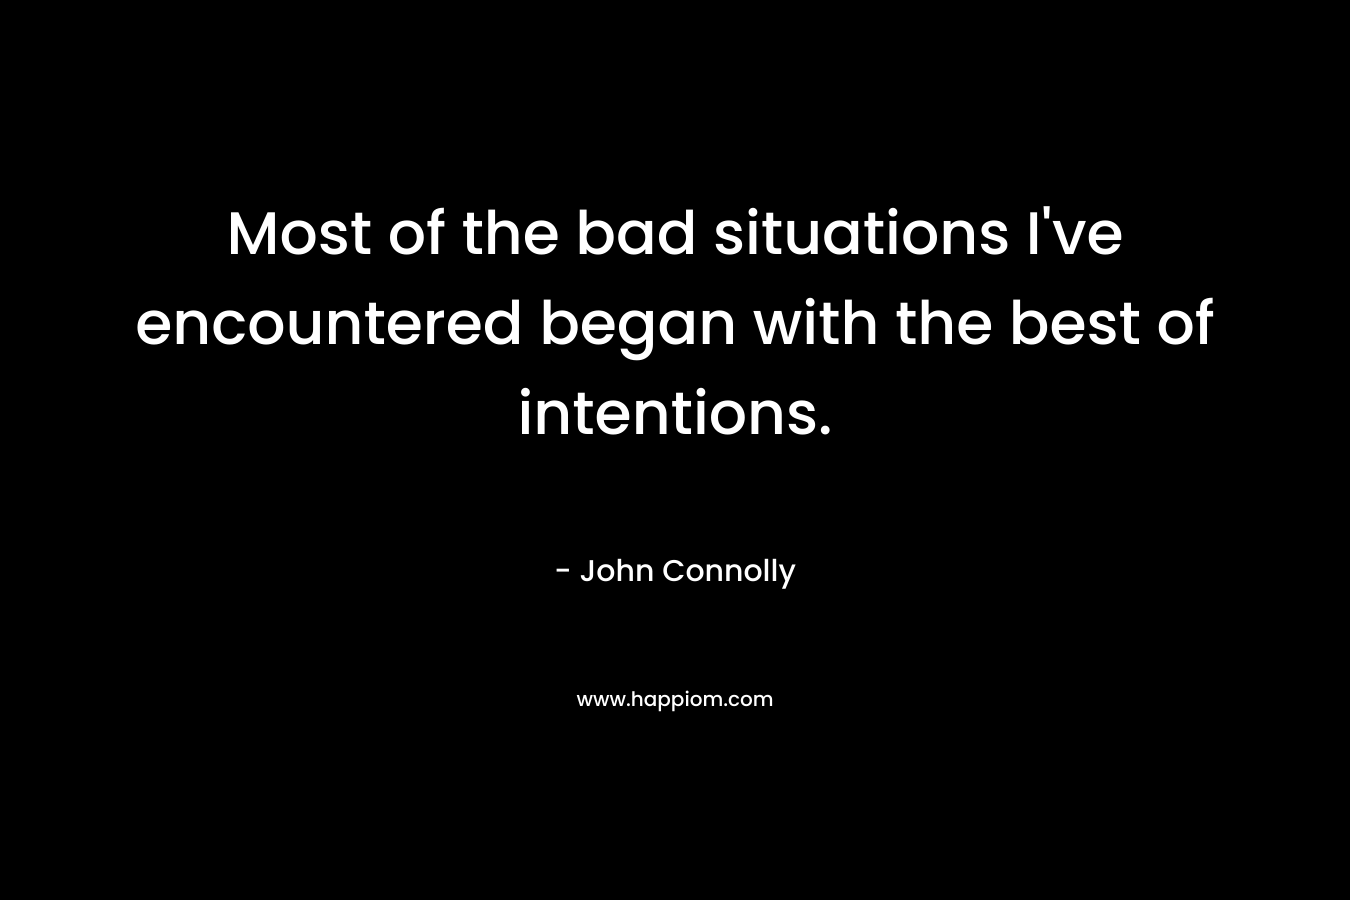 Most of the bad situations I've encountered began with the best of intentions.